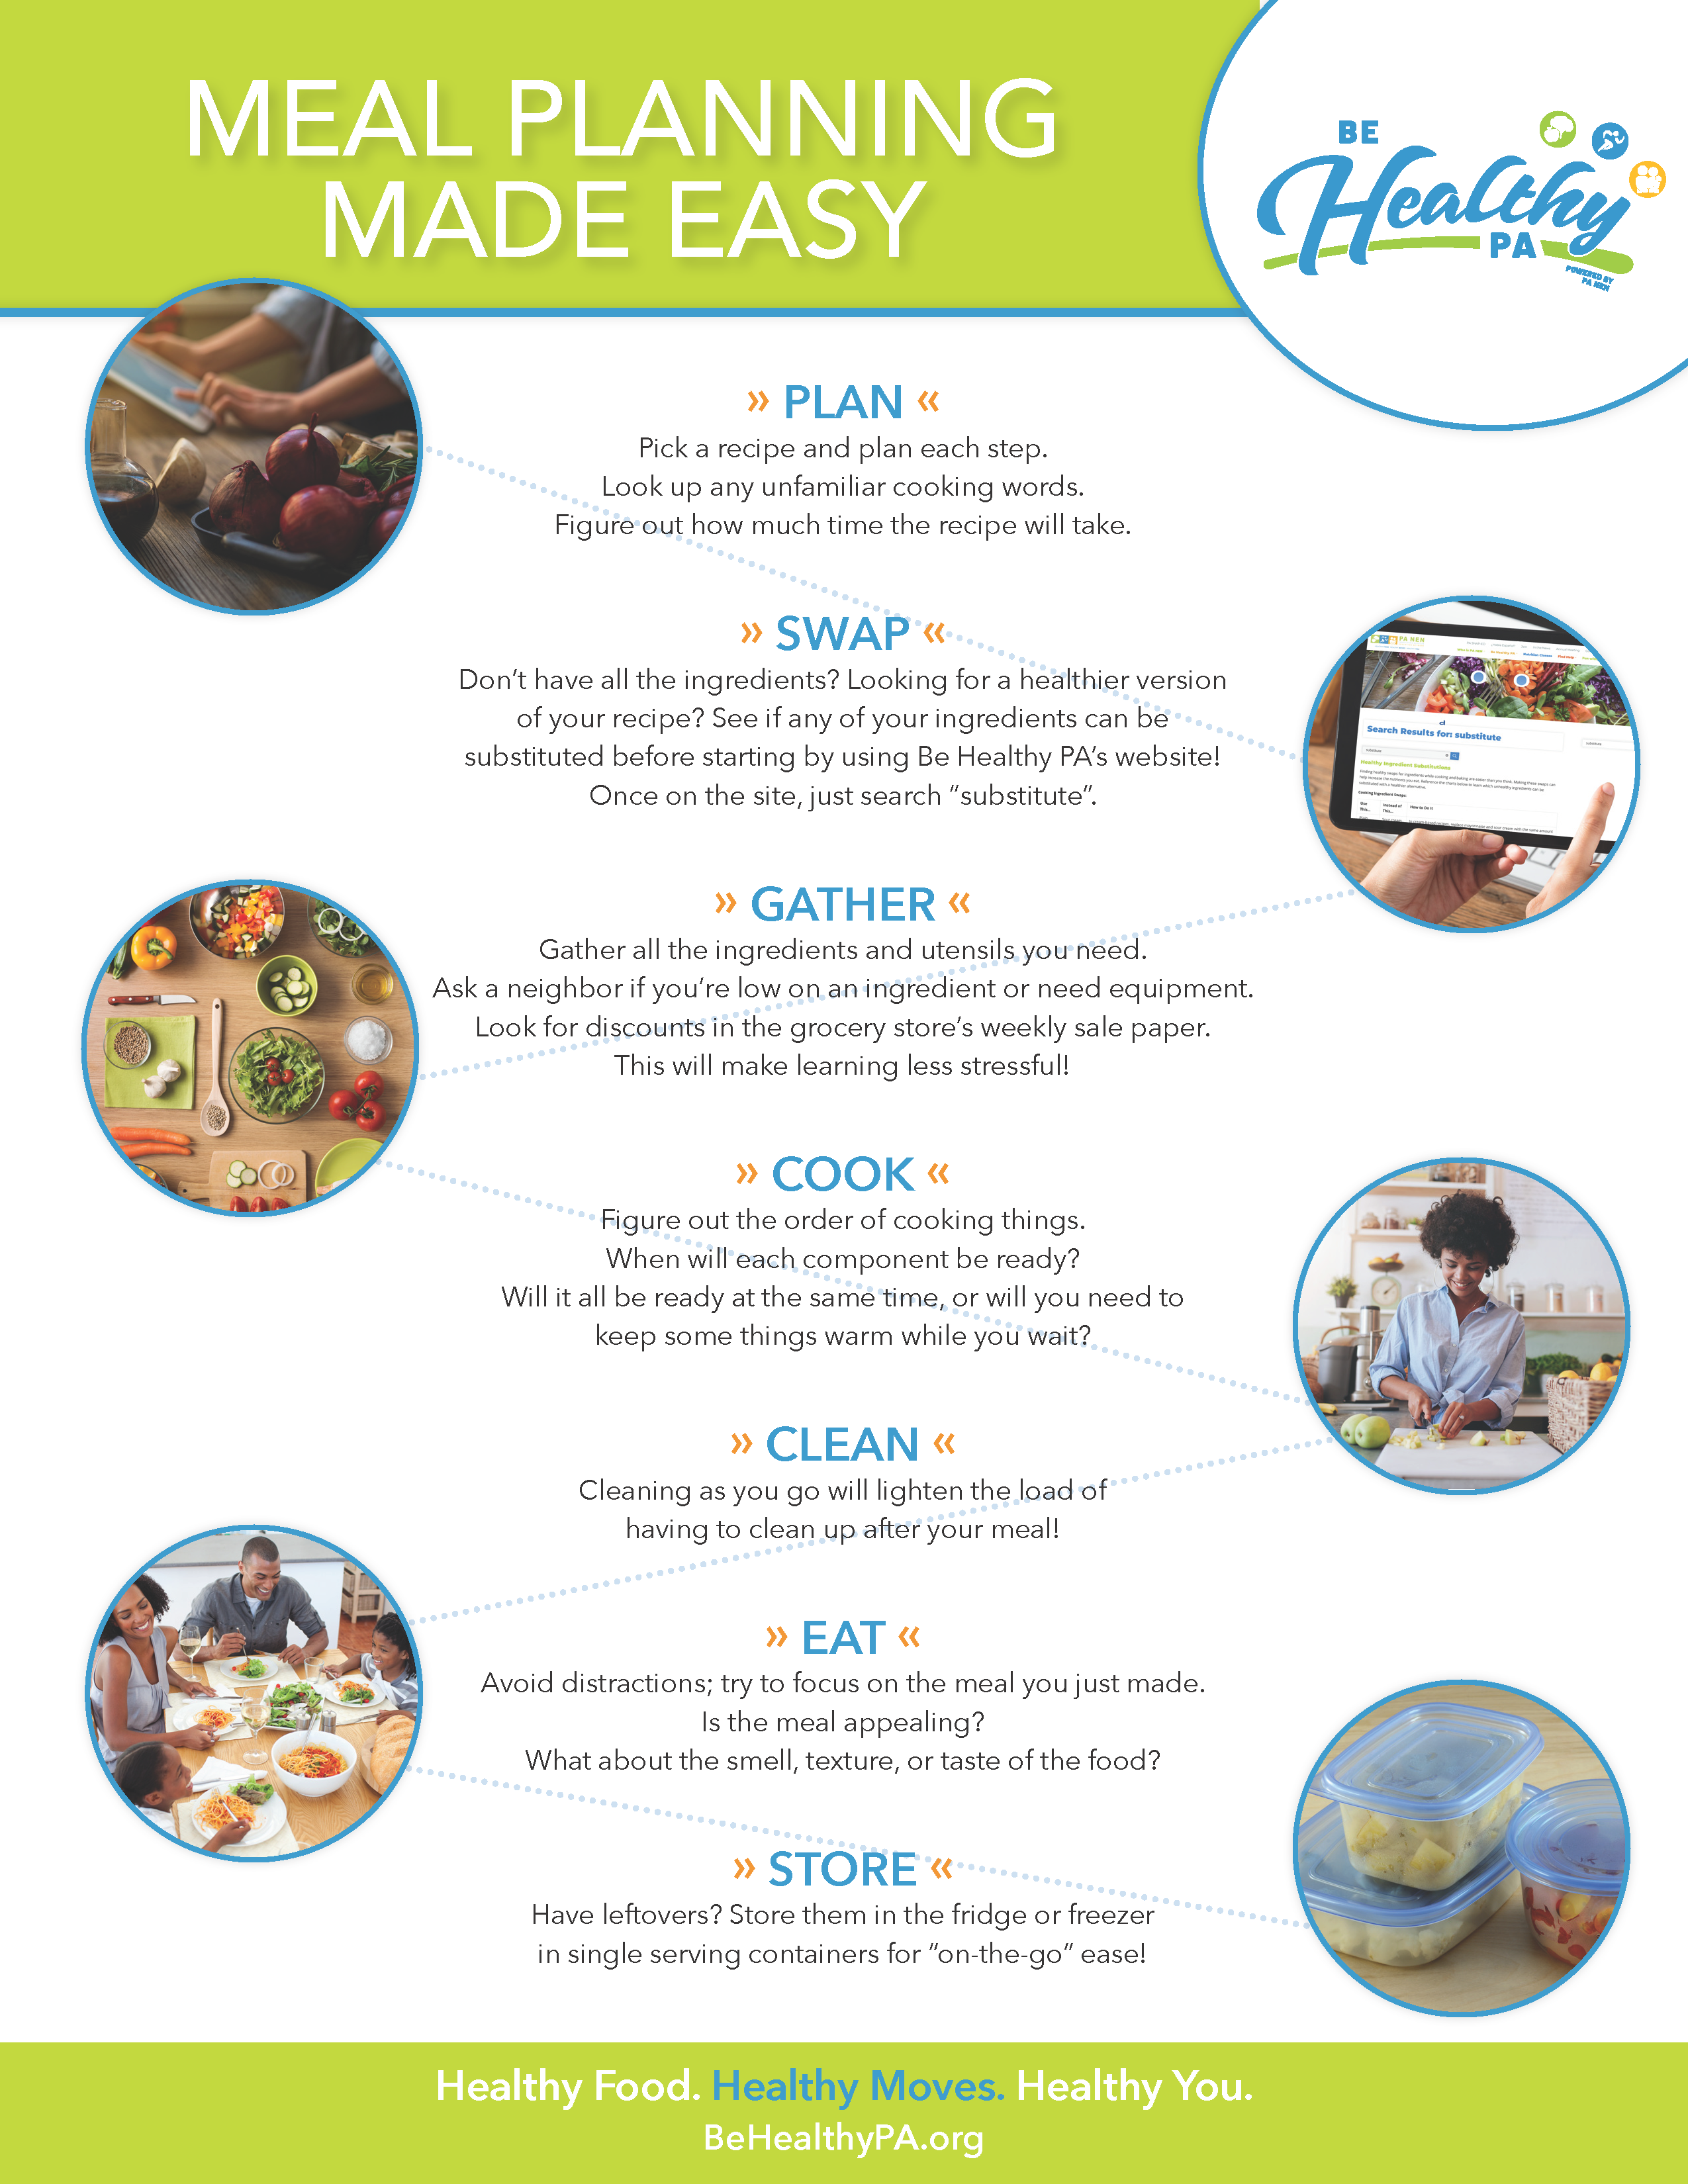 Affordable meal planning guides